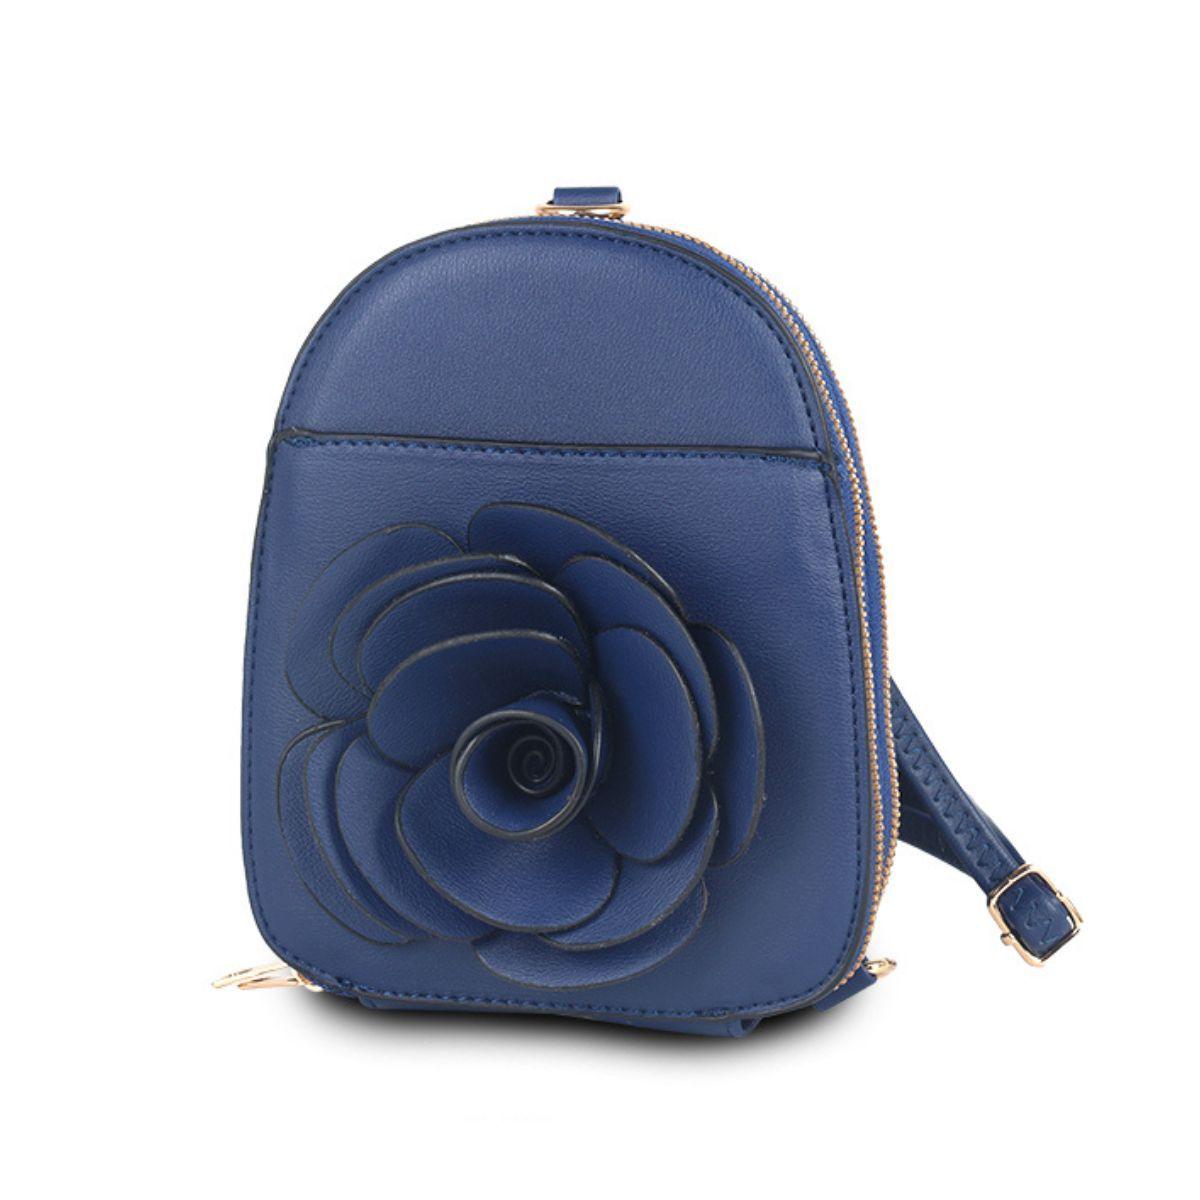 Navy Blue Vegan Leather Floral Mini Backpack: Stylish & Secure